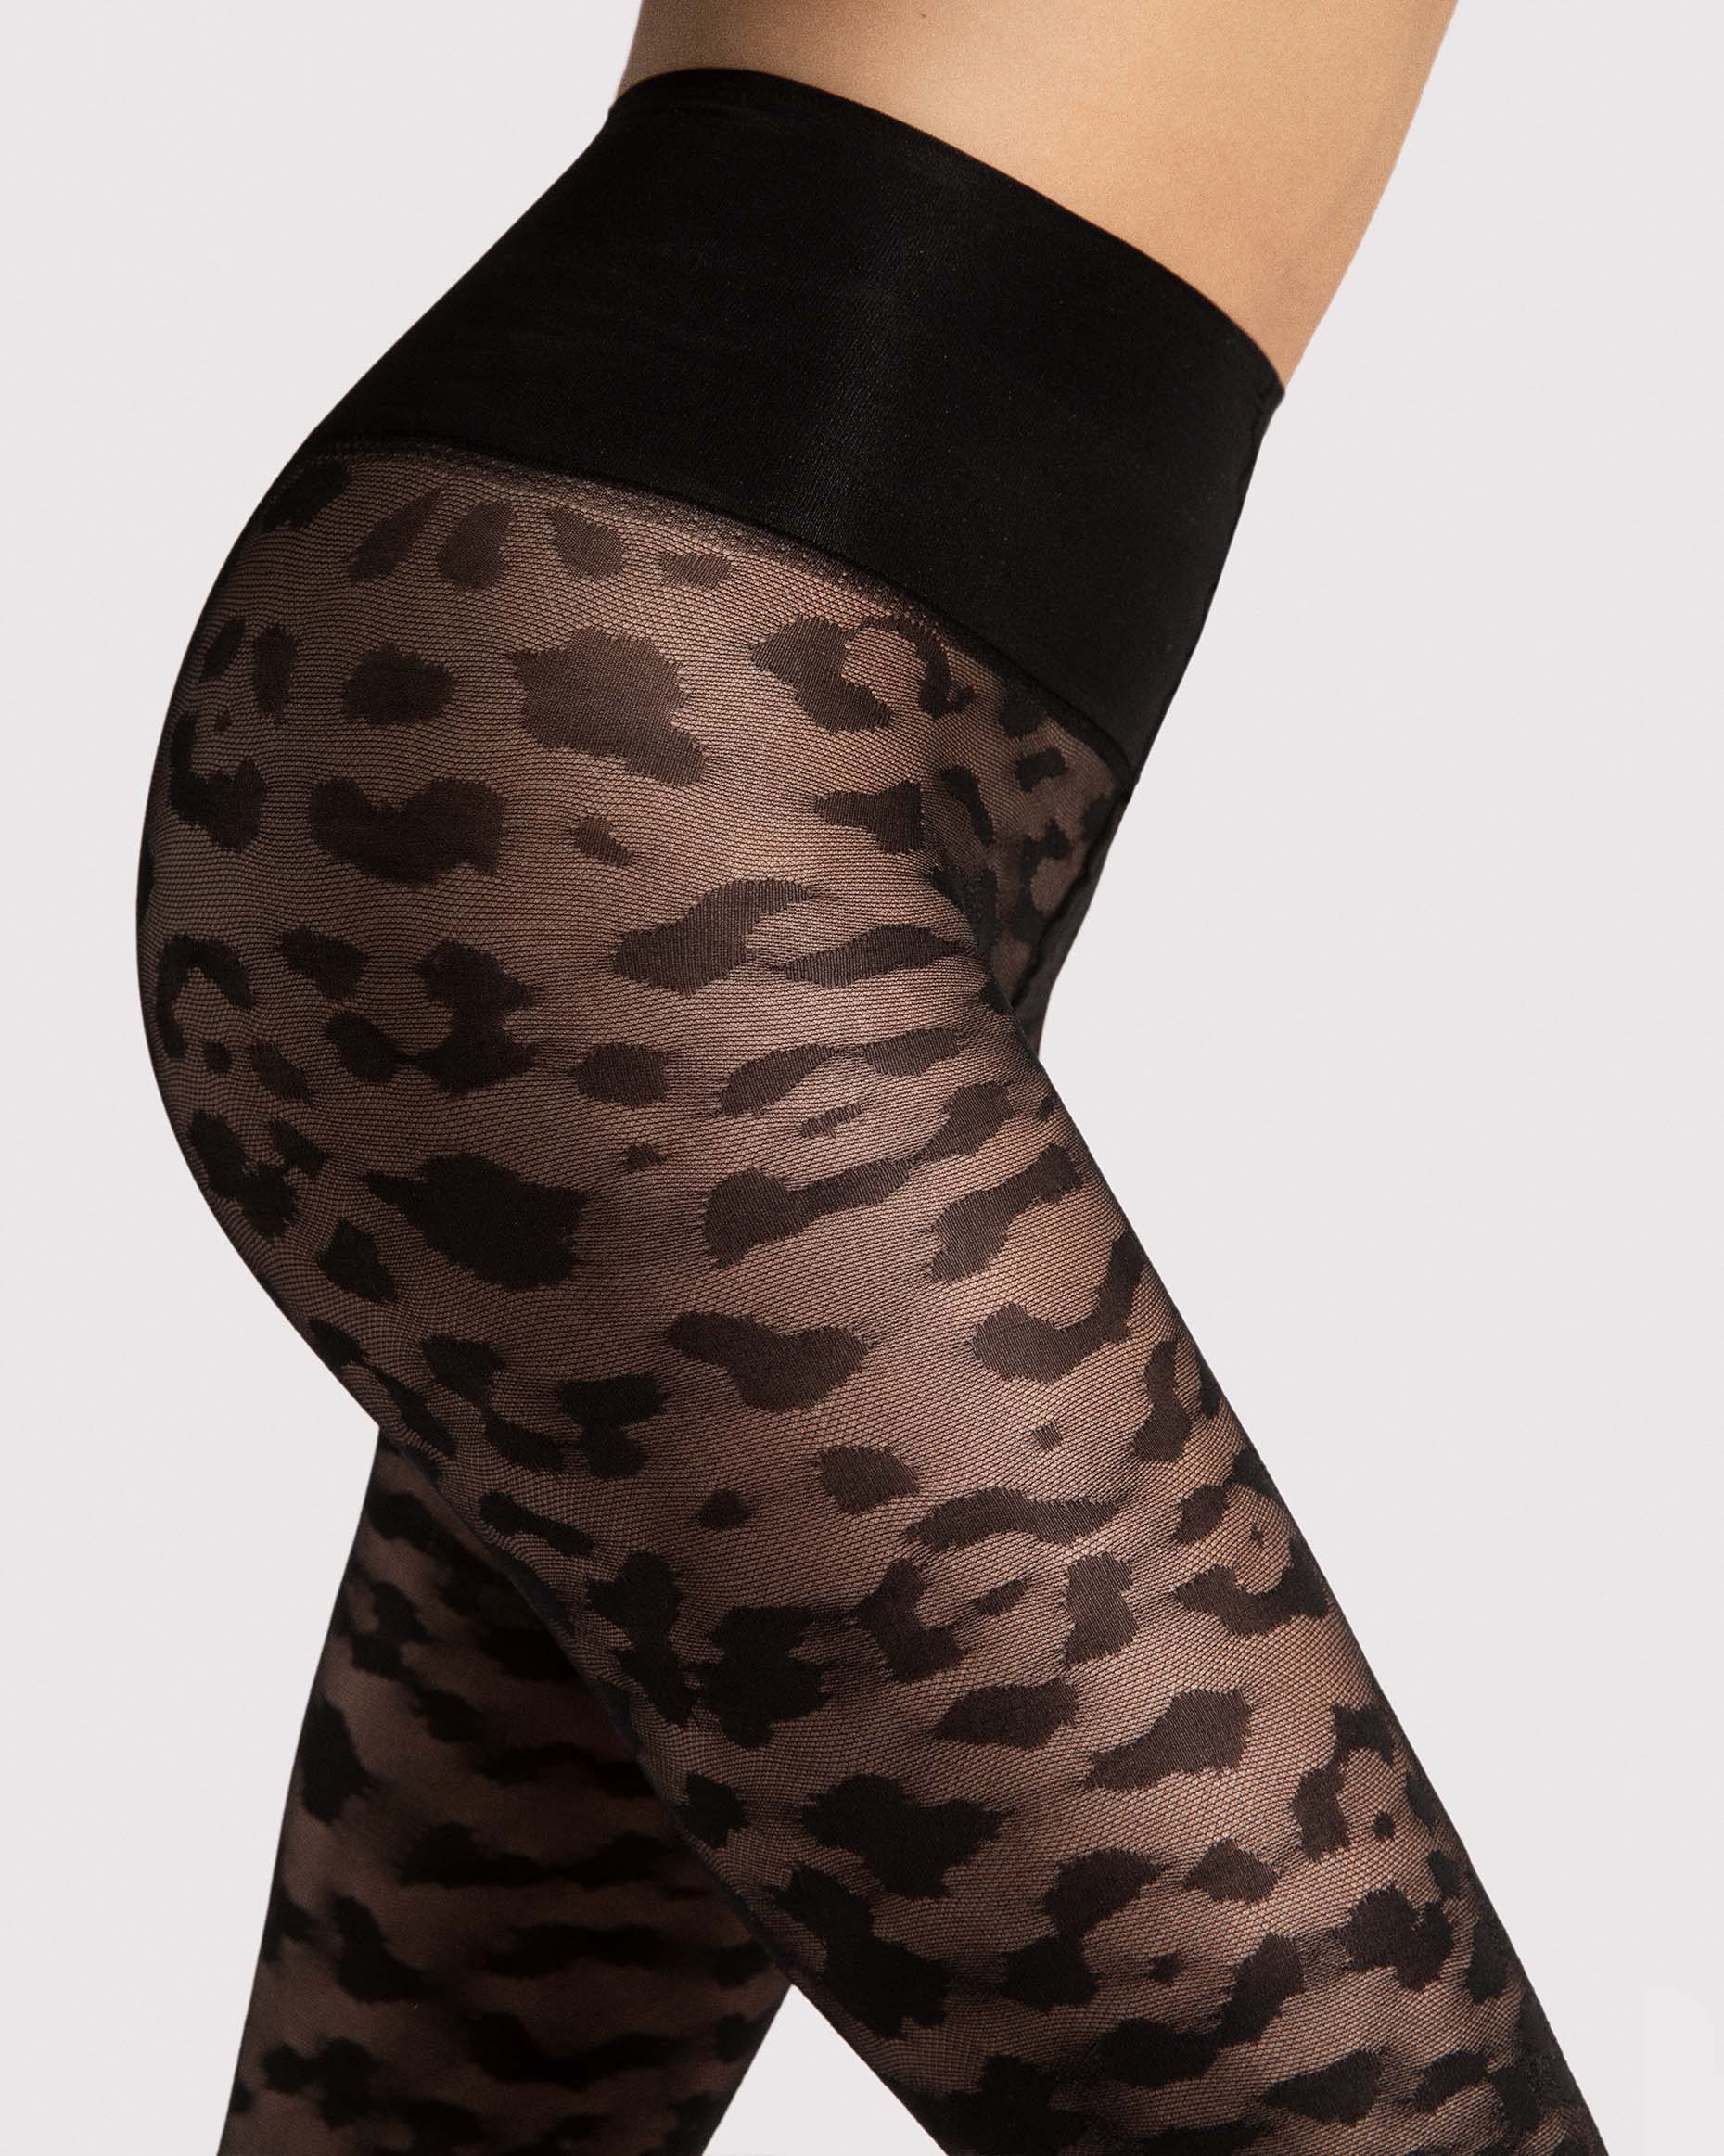 Fiore Echo Leopard Tights - Black micro mesh semi-sheer fashion tights with a woven leopard print style pattern with a extra deep slimming waist band. Close up detail.